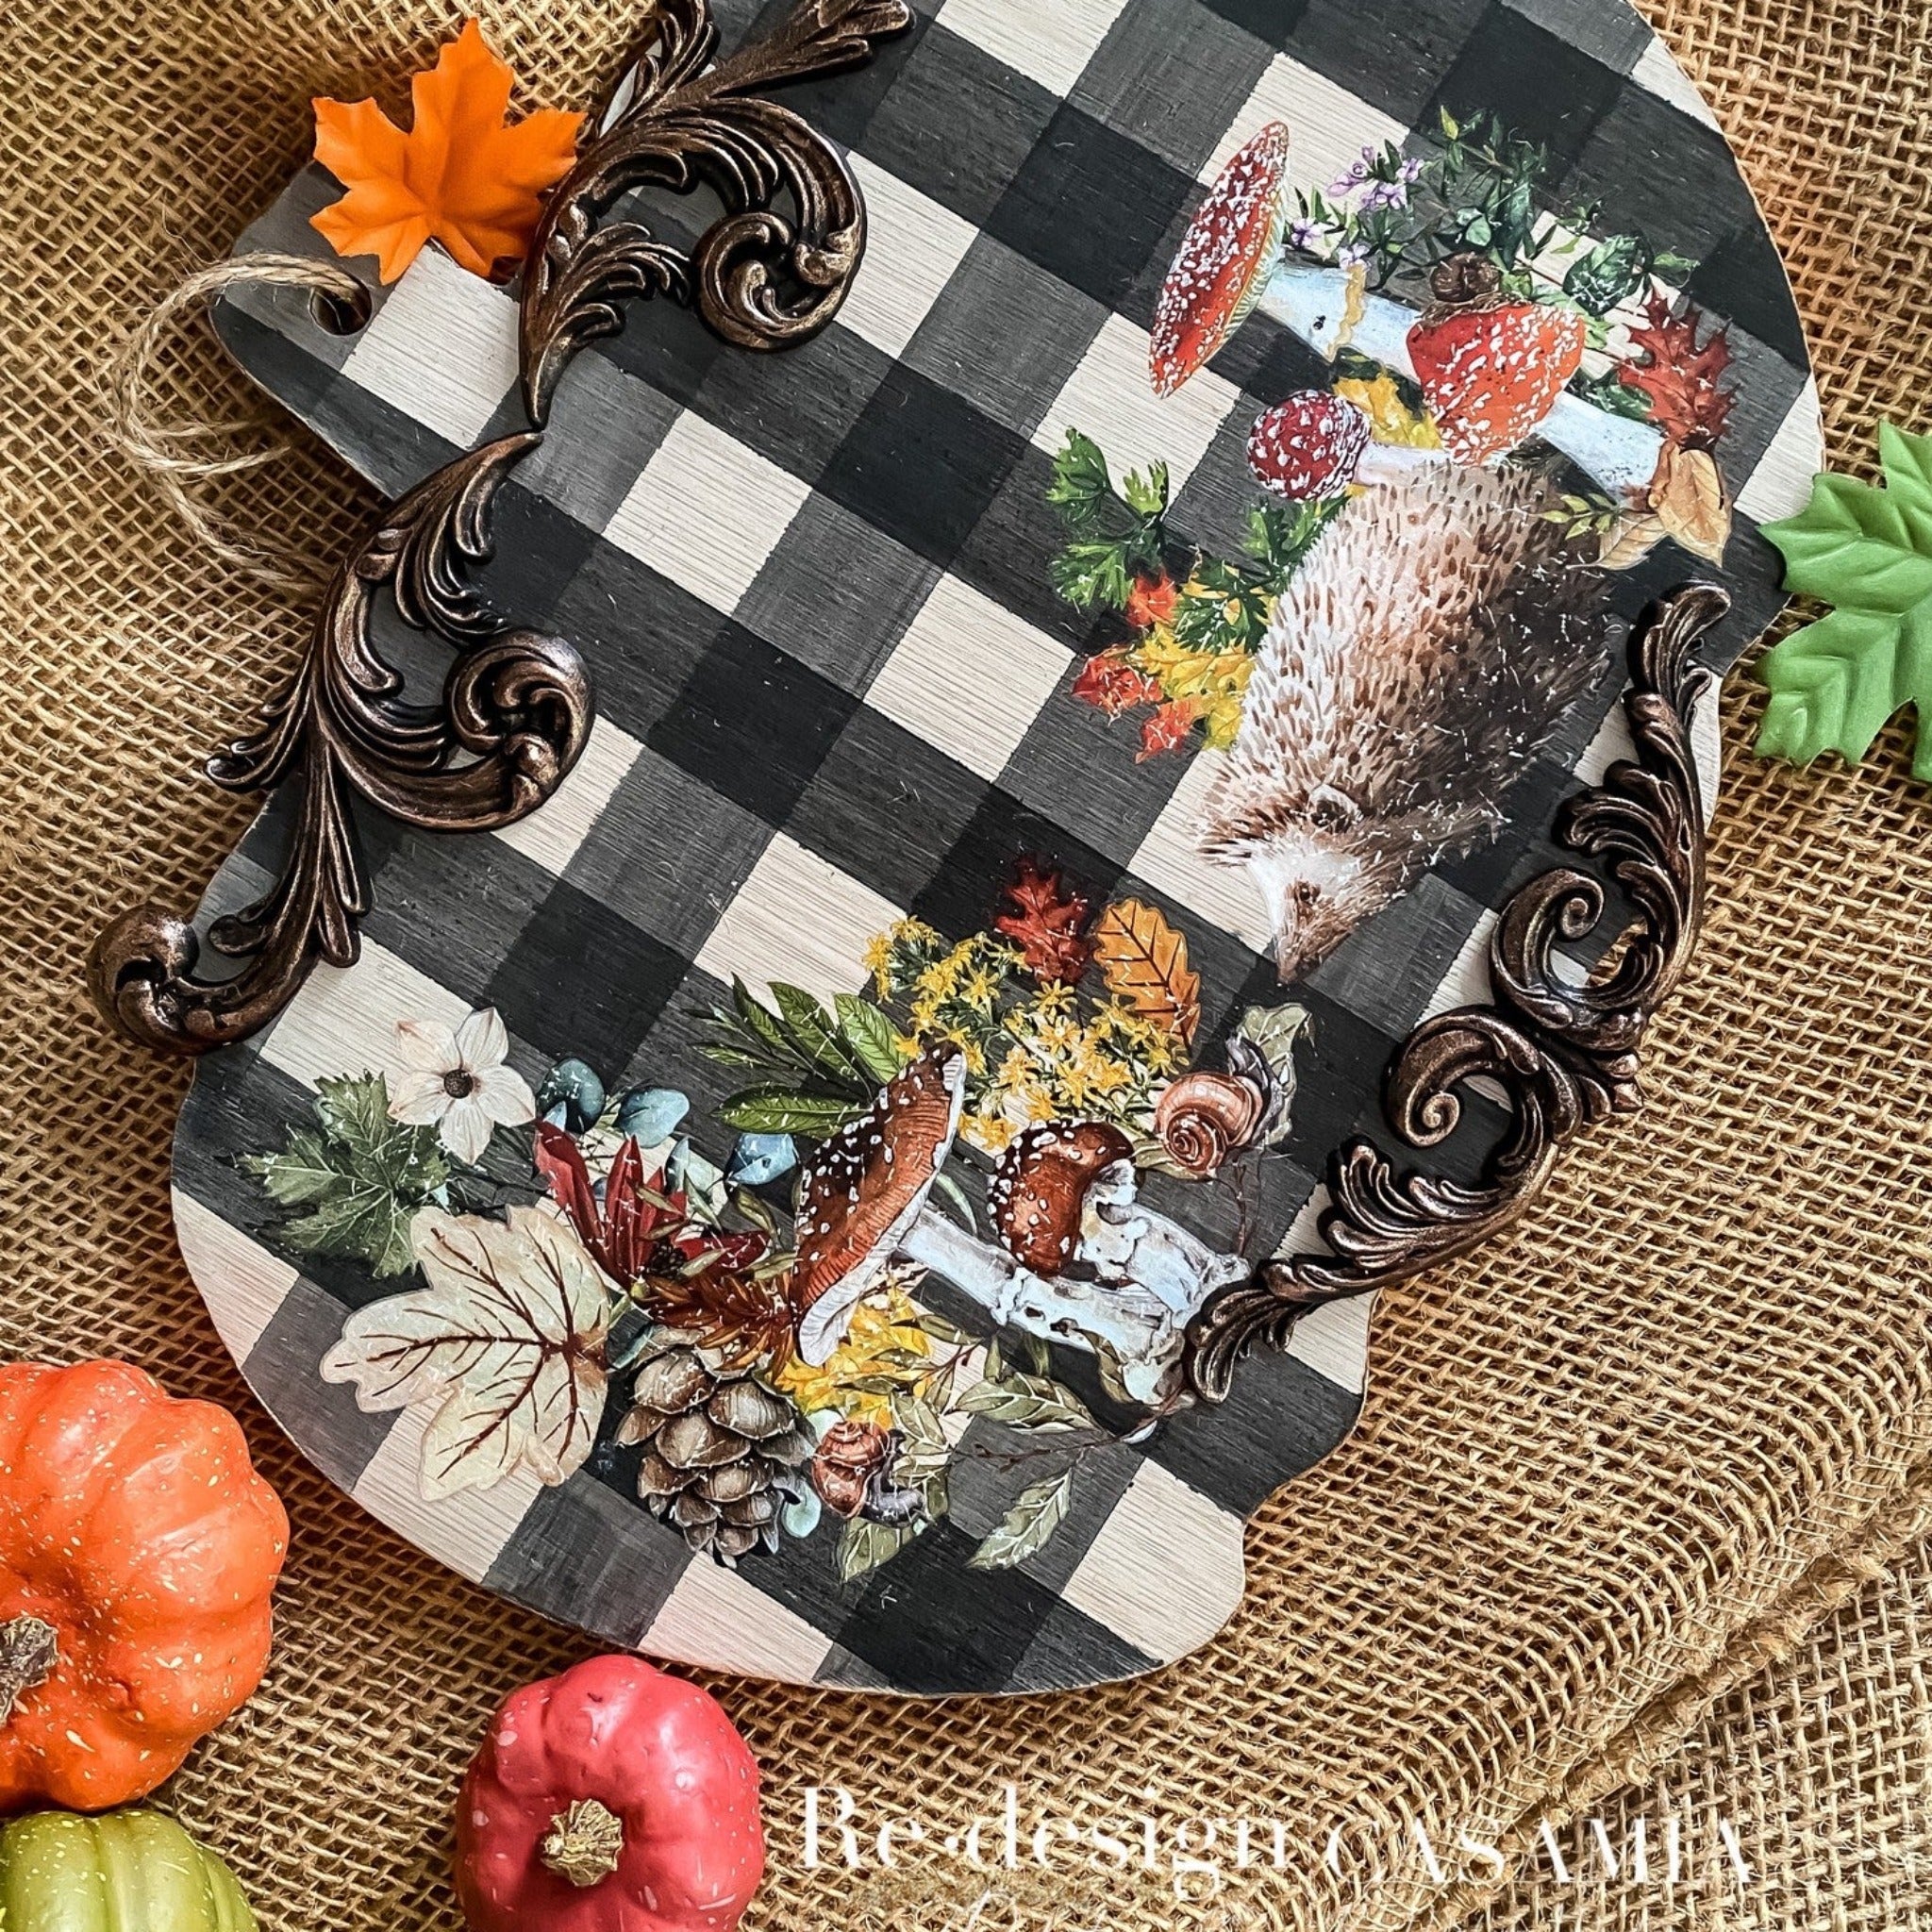 A wood pumpkin craft project created by CasaMia is painted black and white plaid and features ReDesign with Prima's Autumn Essentials small transfer on it along with some bronze colored scroll silicone mould castings.